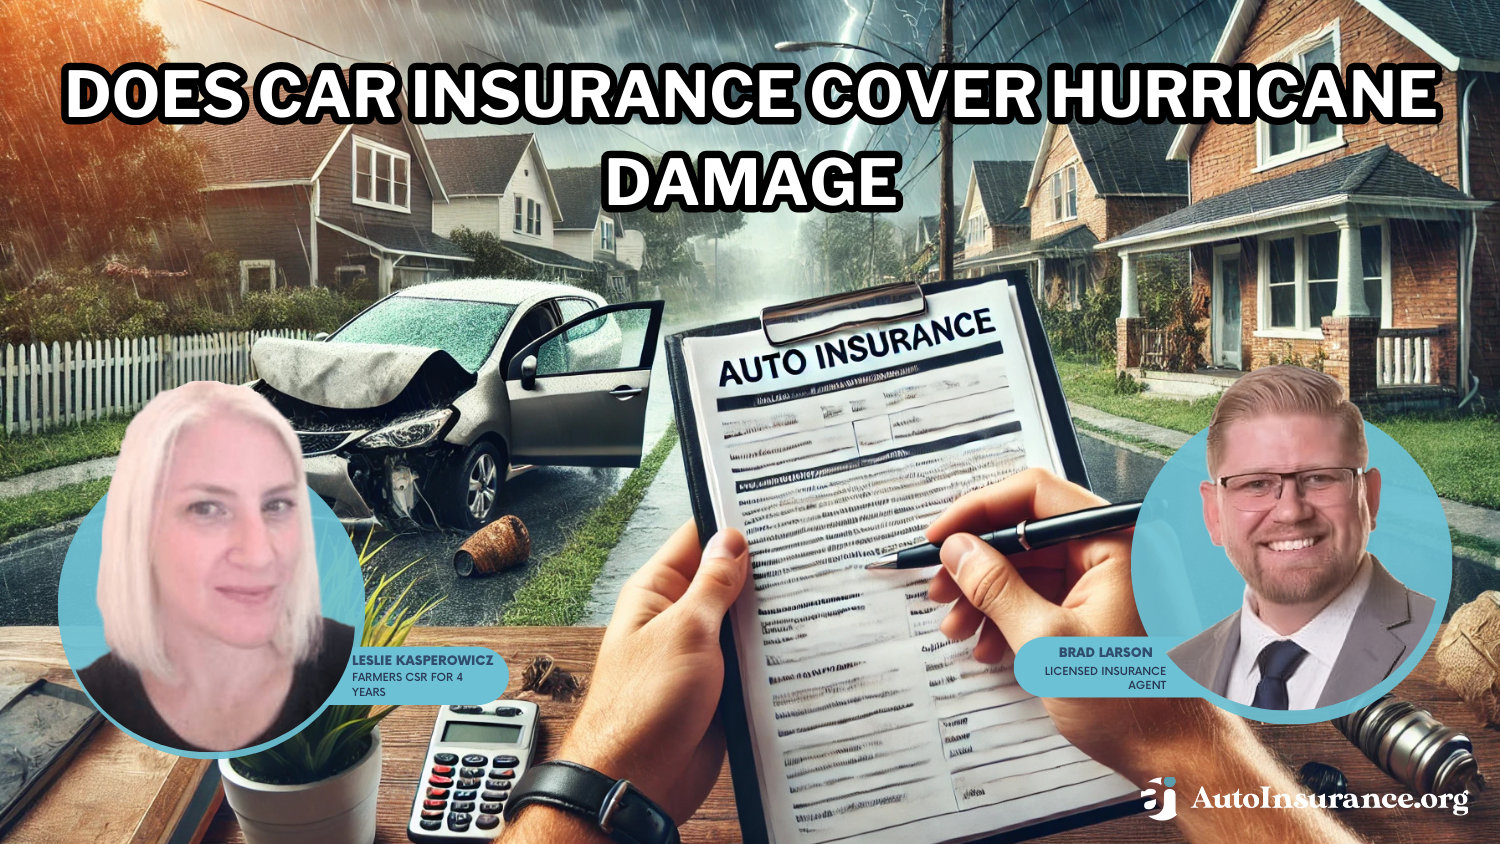 Does car insurance cover hurricane damage?